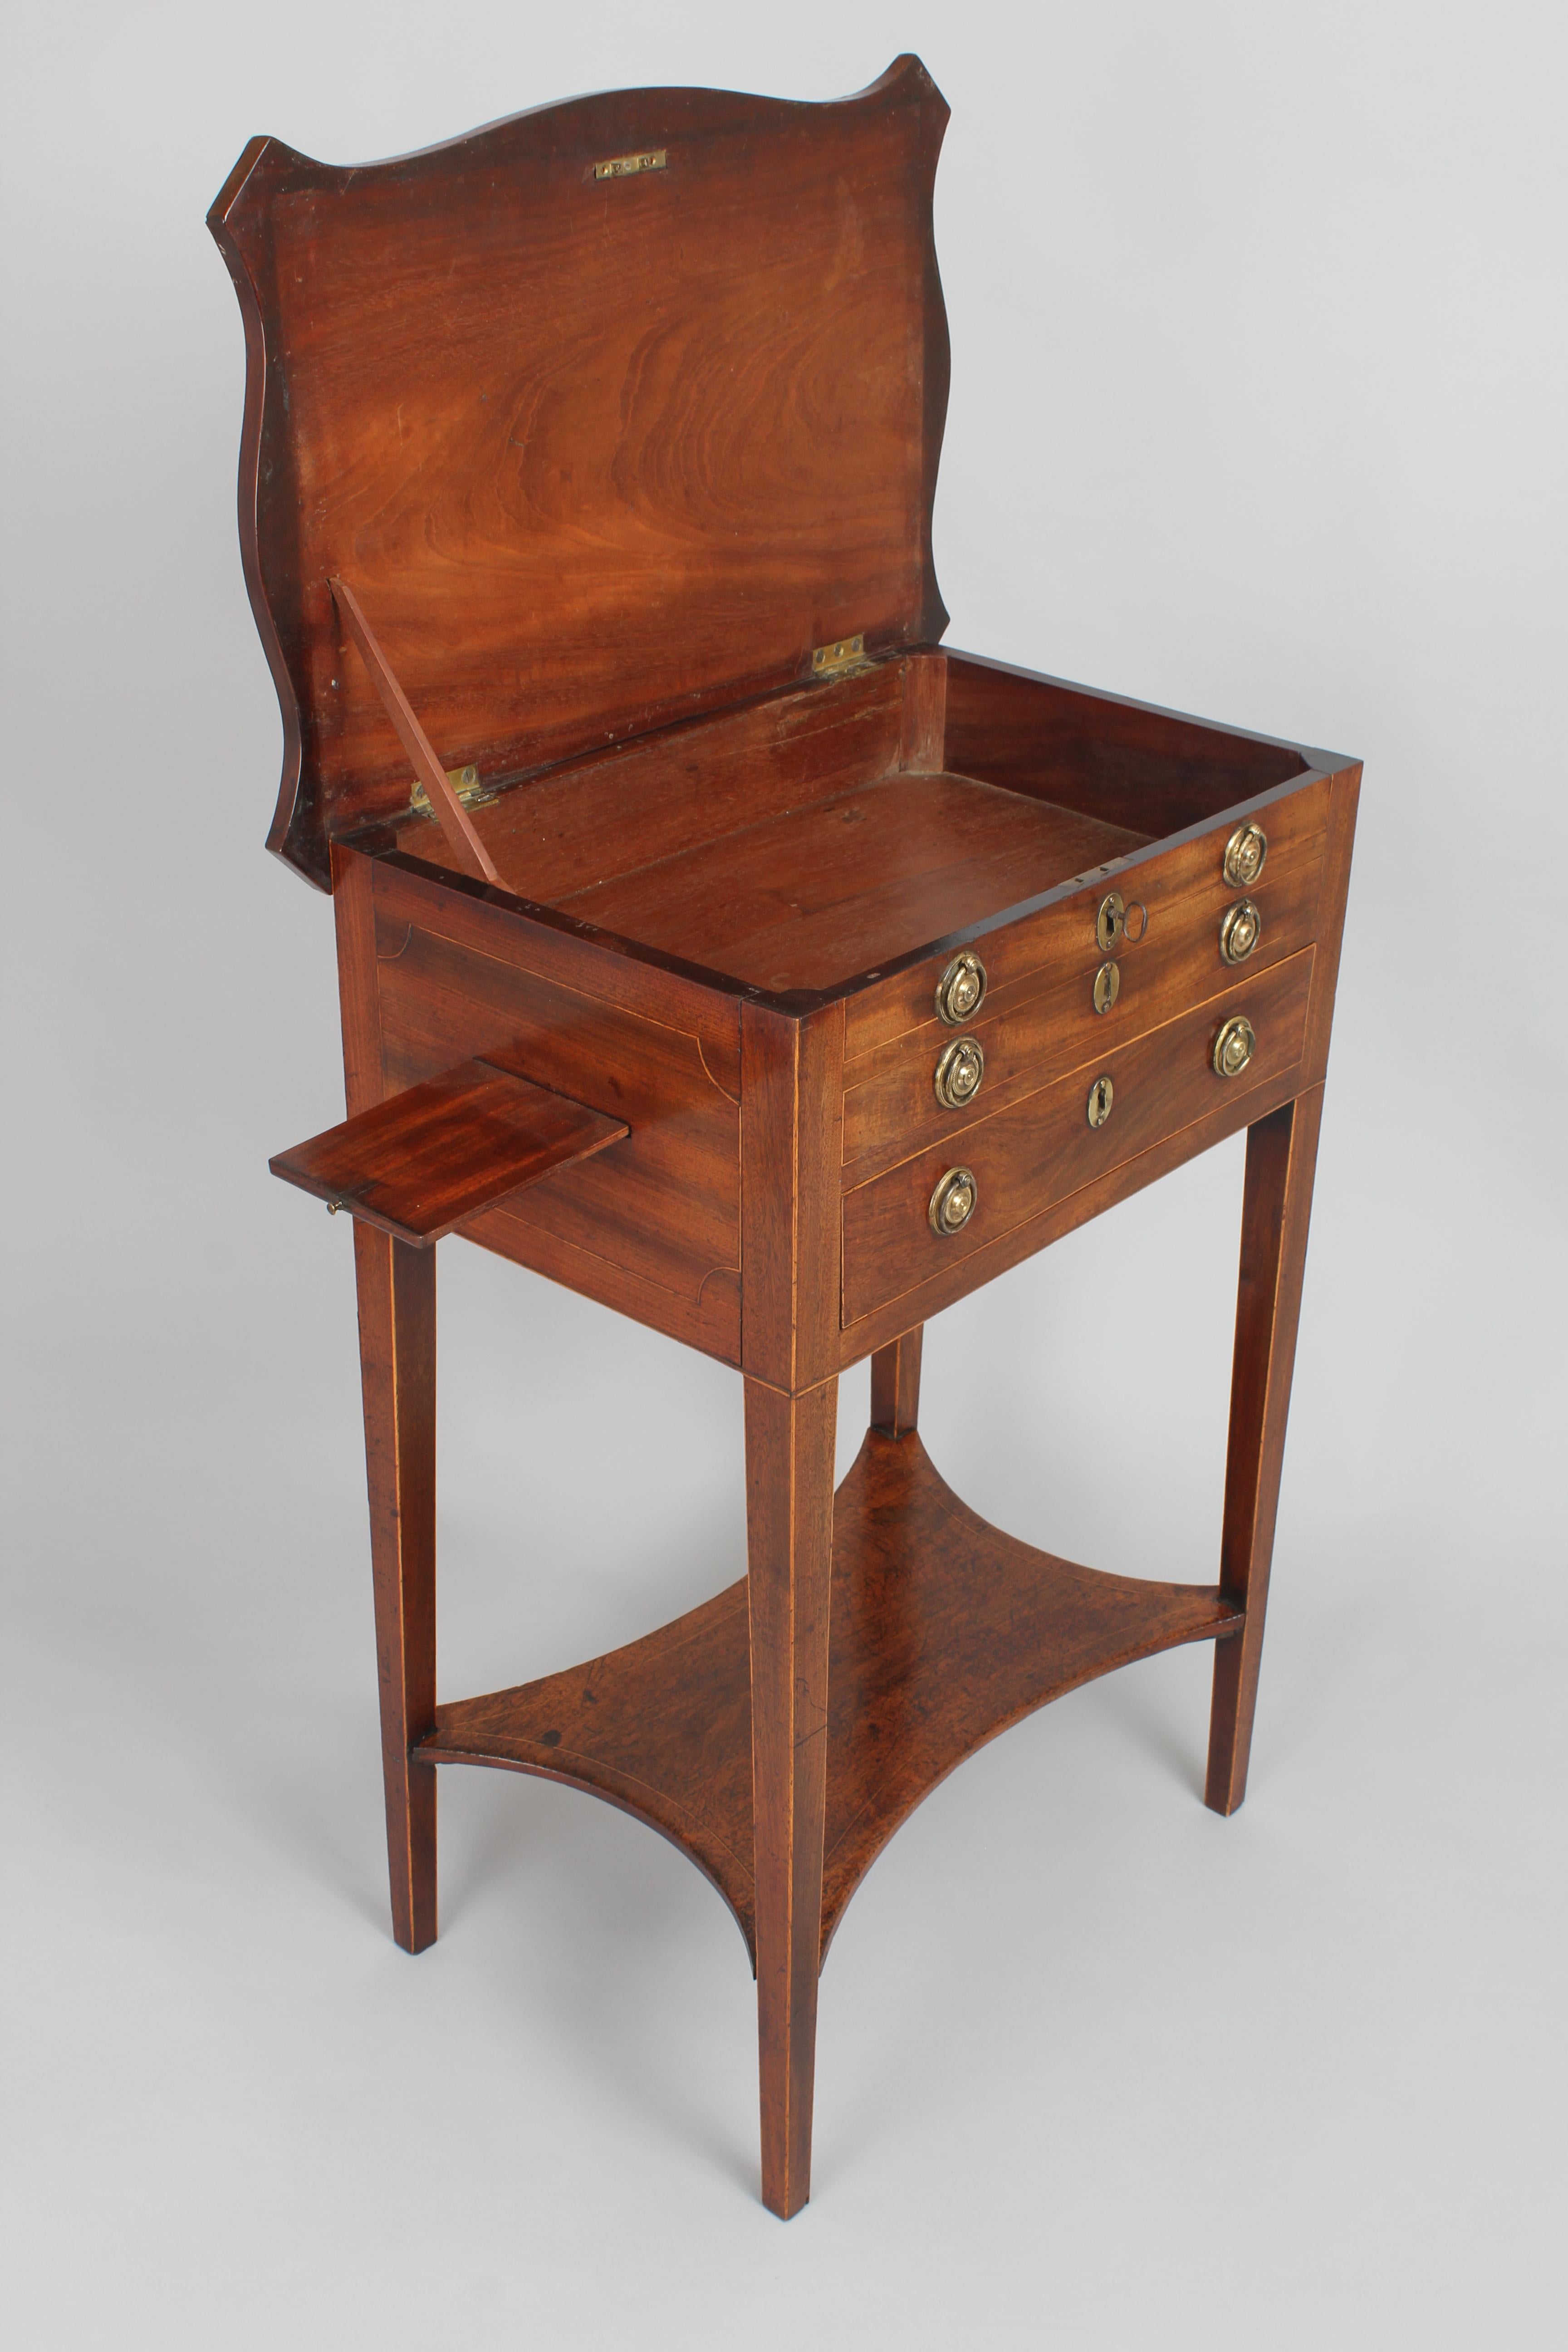 Early 19th Century George III Period Mahogany Worktable